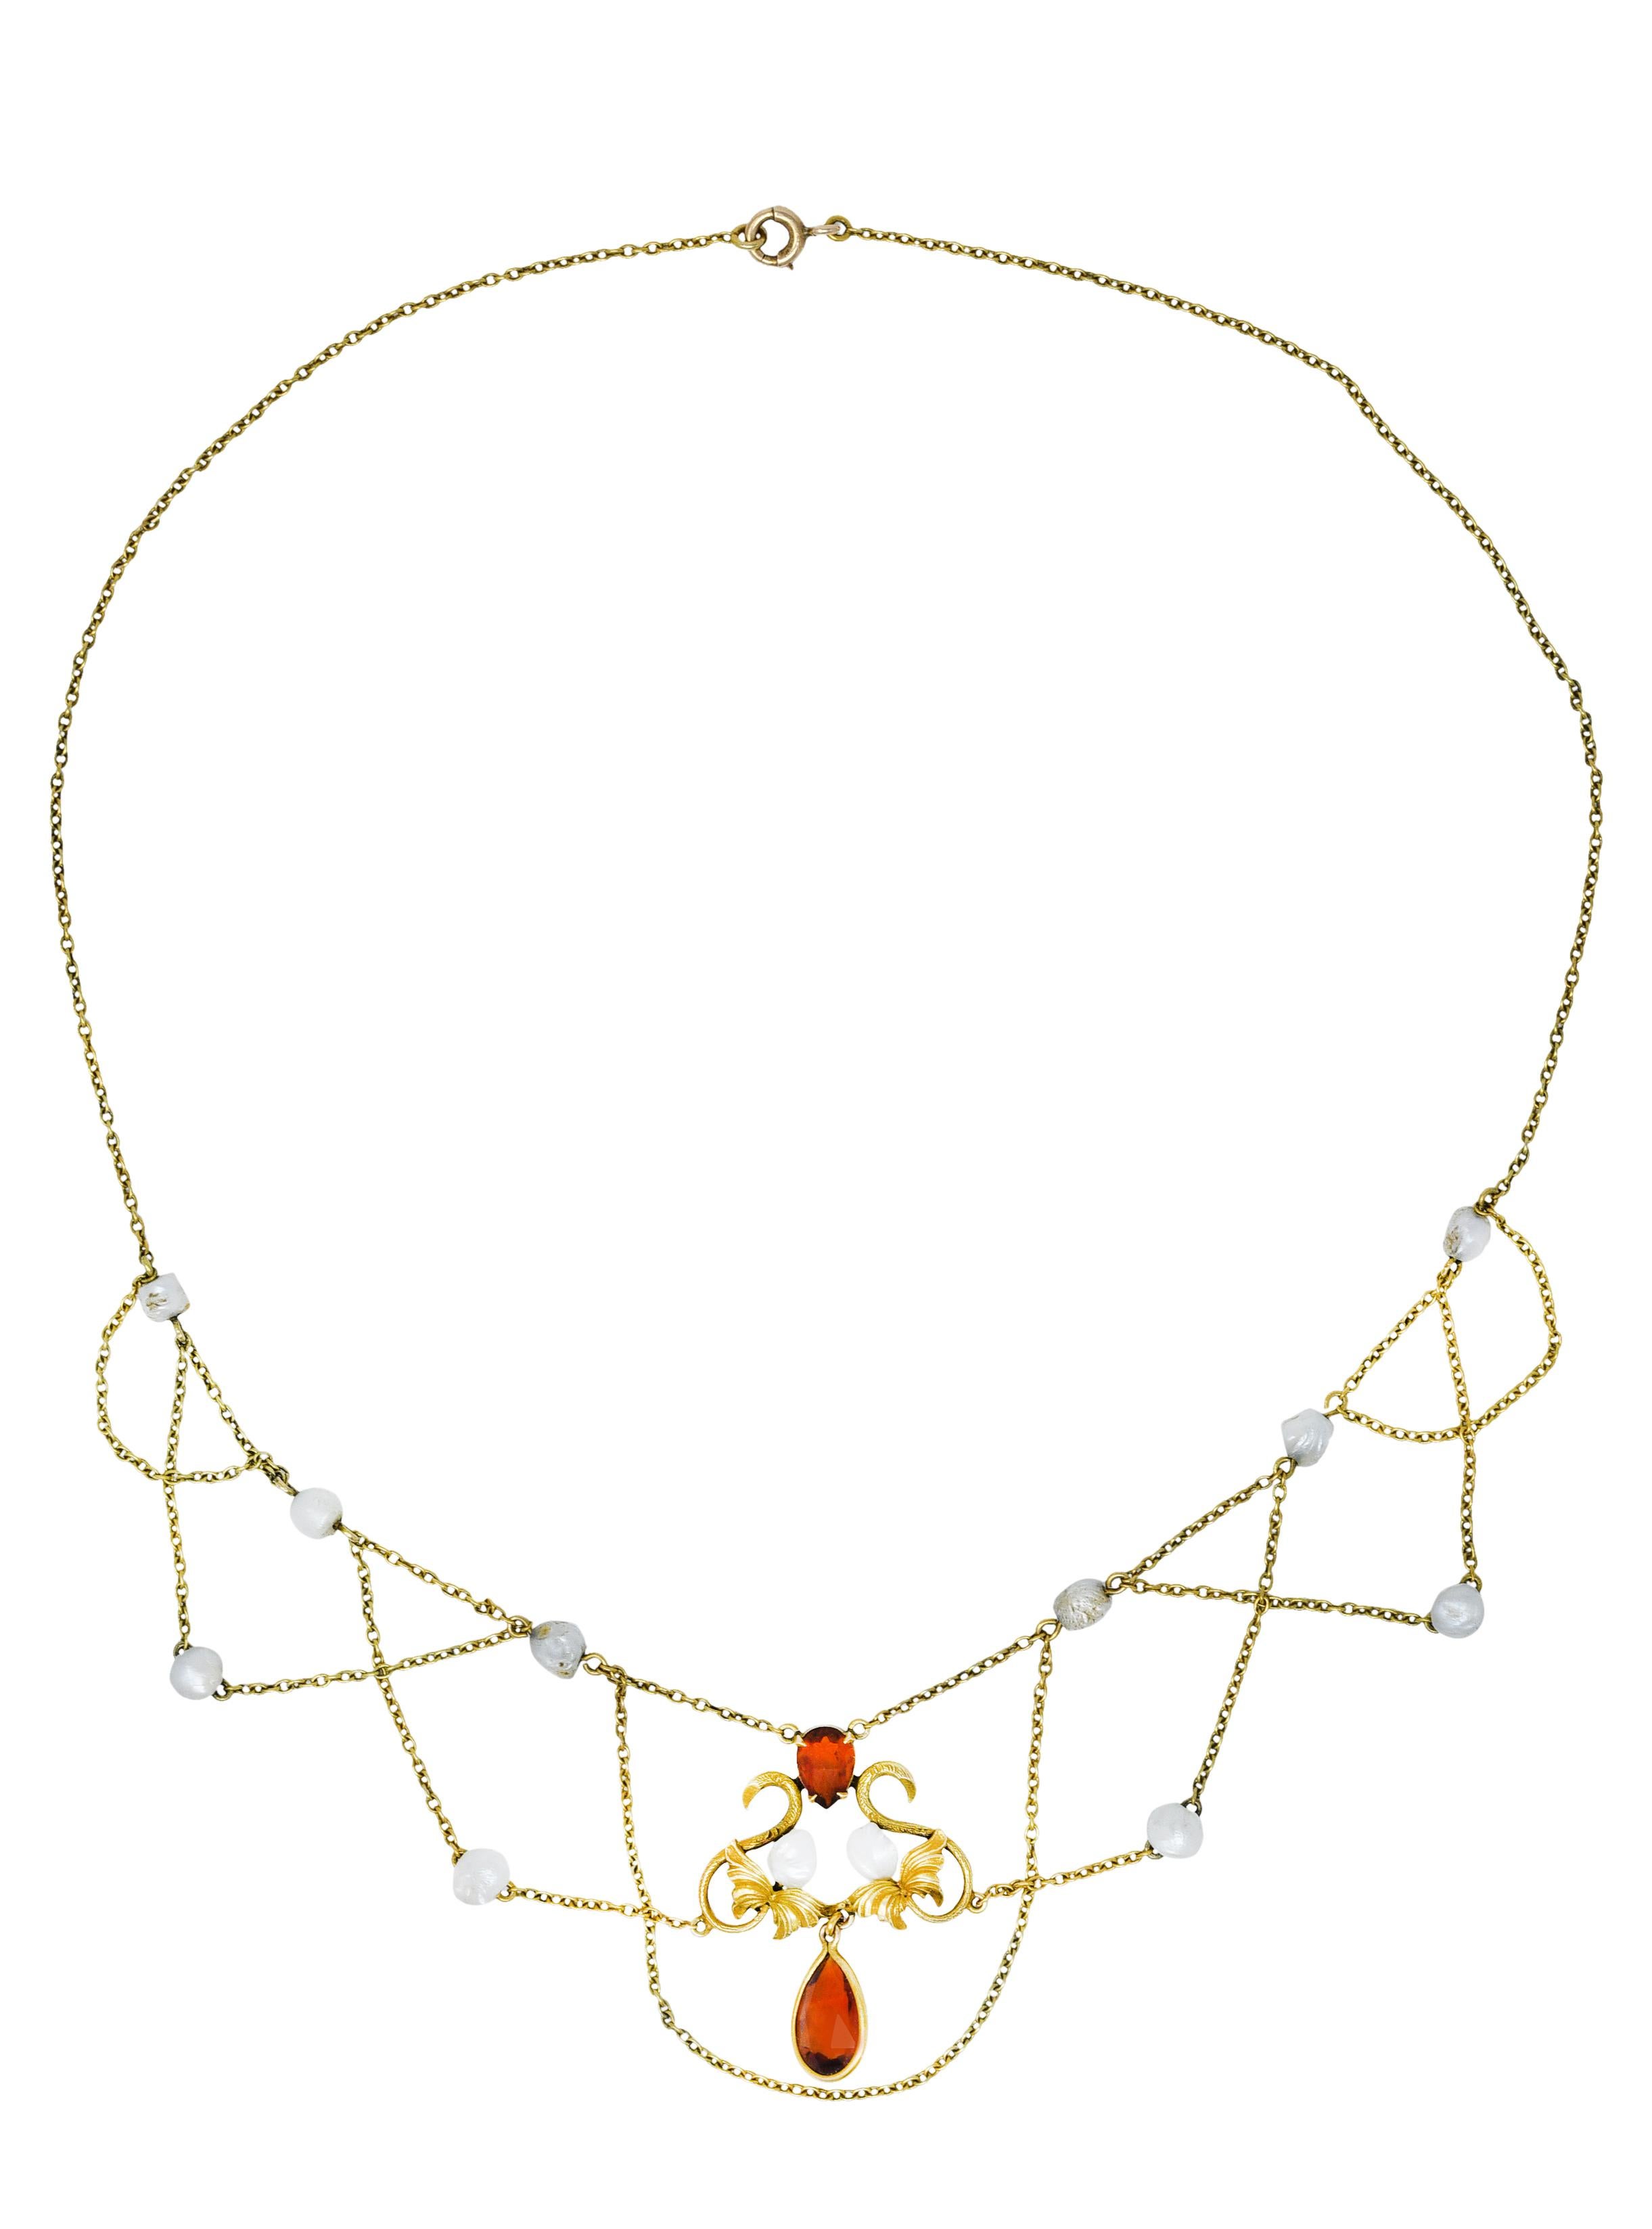 Cable chain necklace features swagged chain accented by baroque pearl stations

Measuring approximately 4.5 mm - white in body color with moderate to strong iridescence

With a scrolling central station designed with whiplashed foliate and two pear